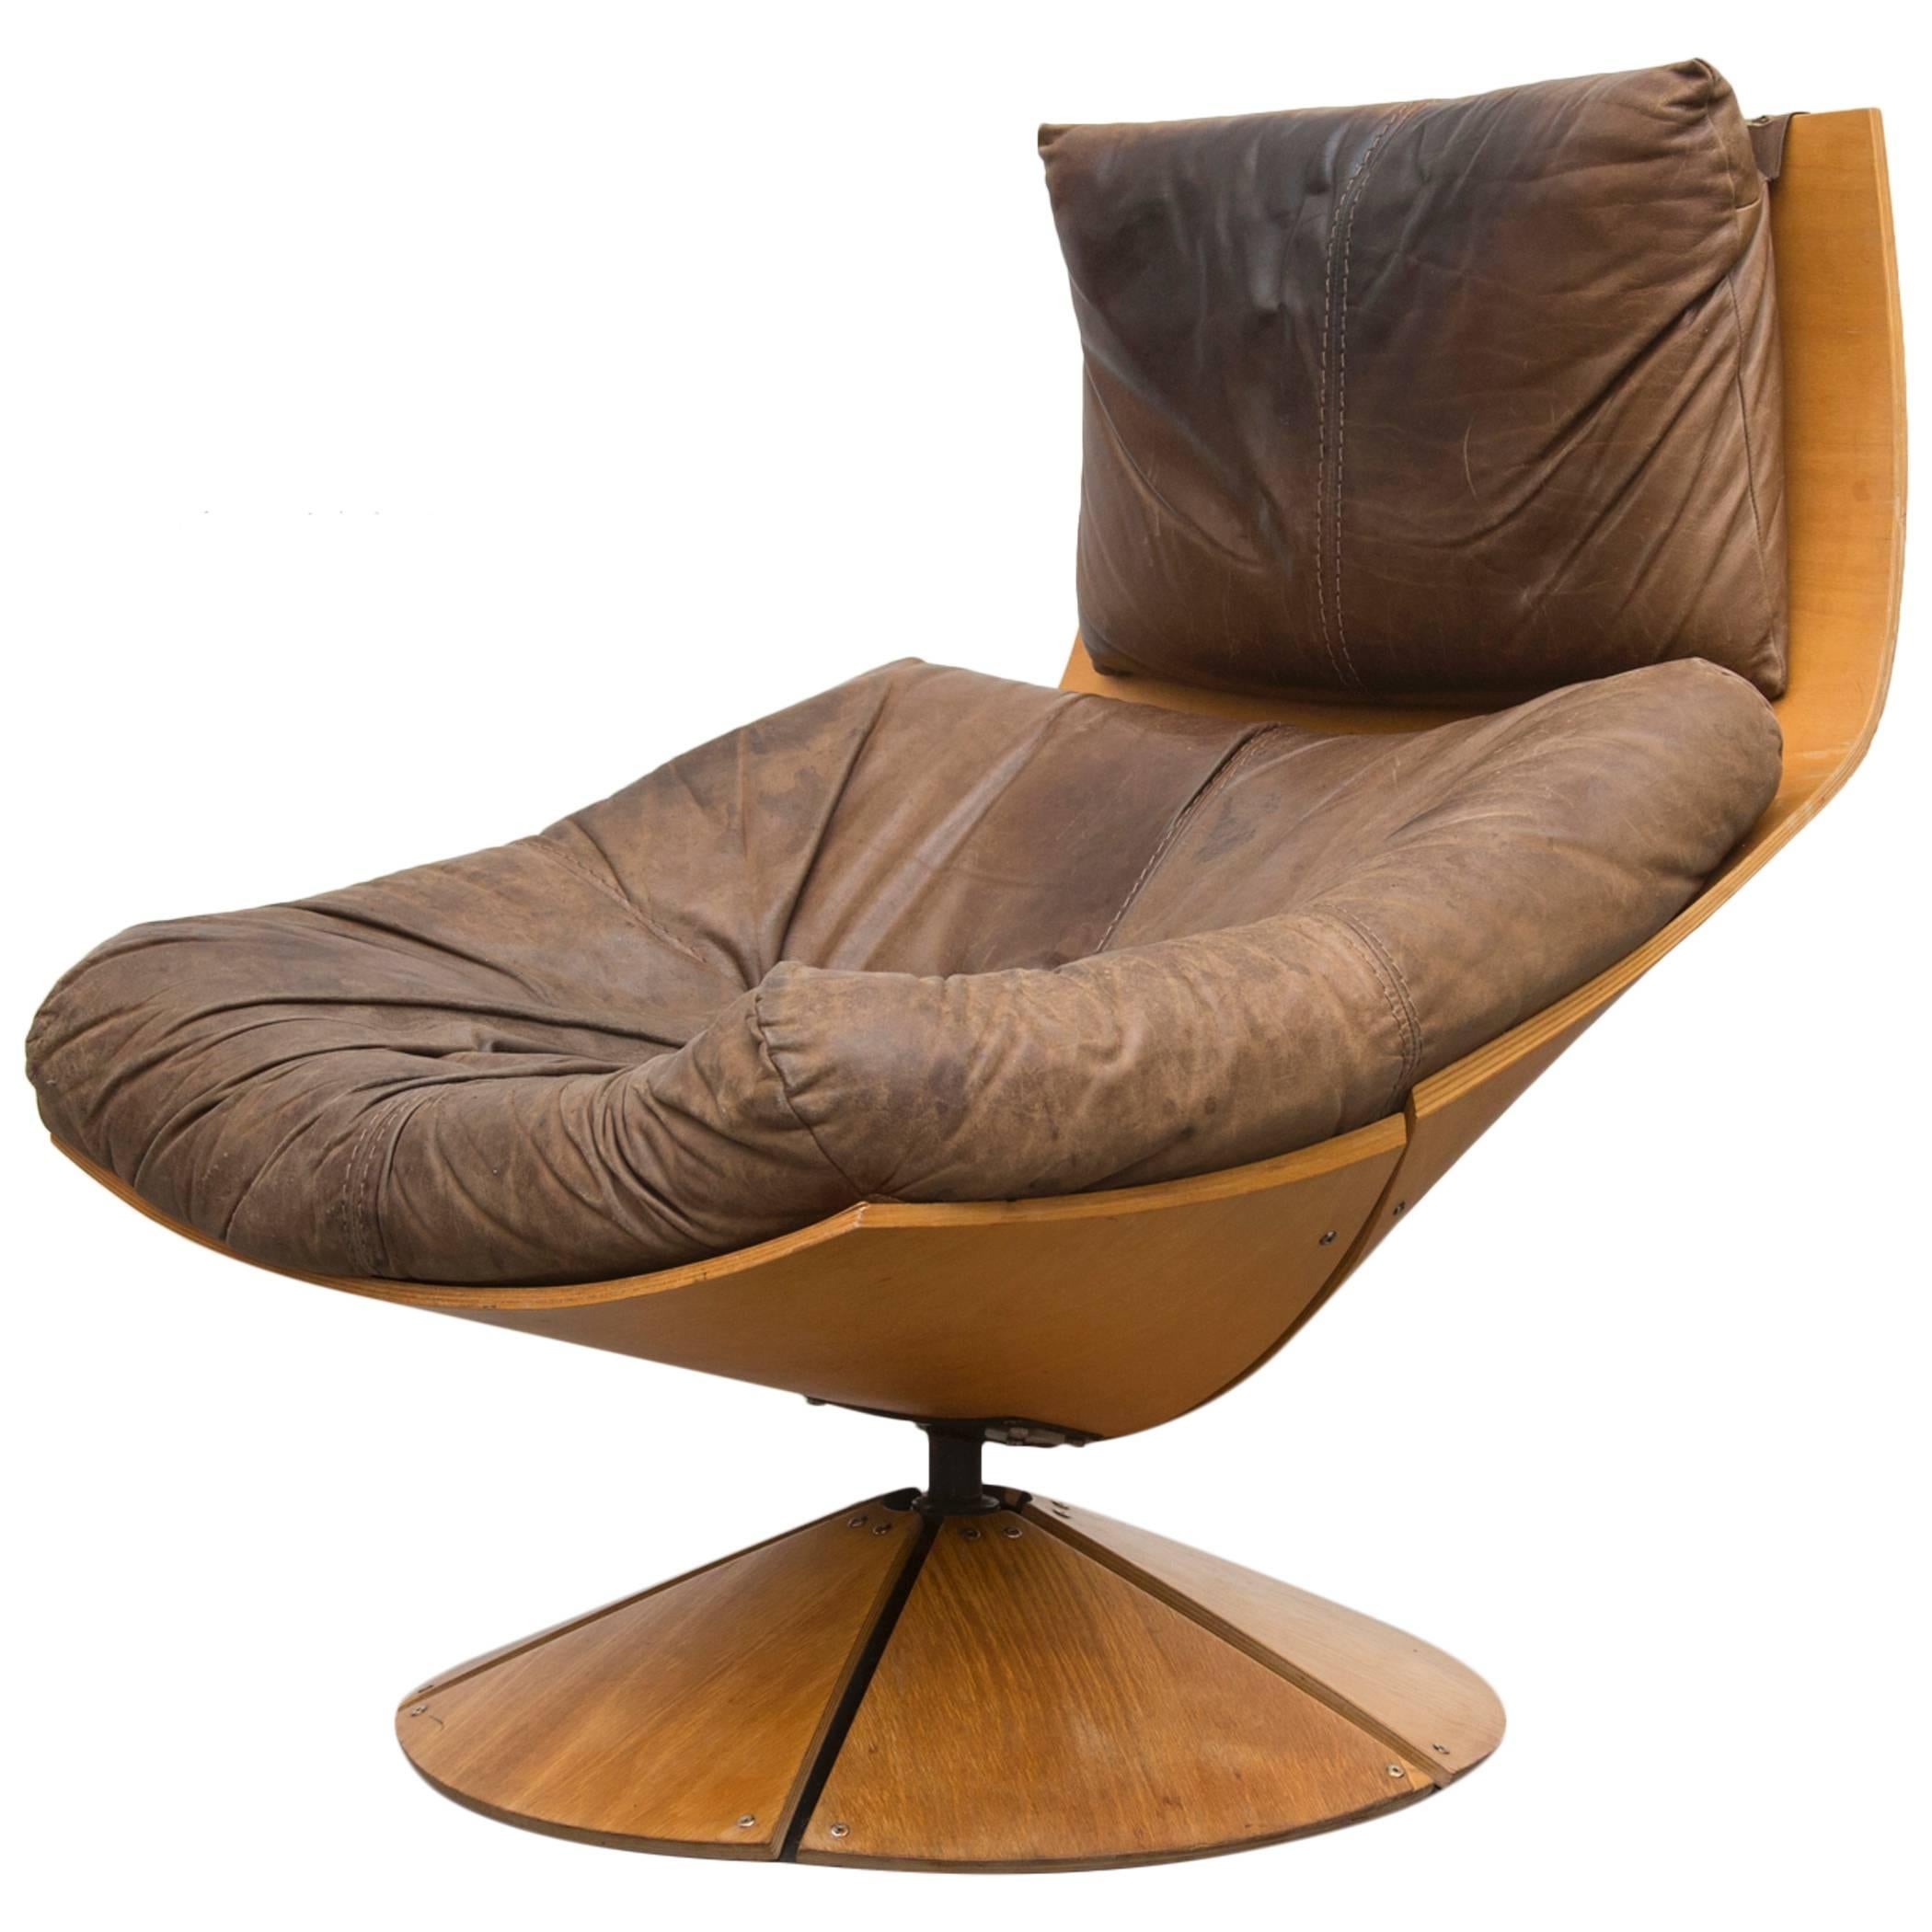 Solid Paneled Wood Gerard Van Den Berg Swivel Lounge Chair with Leather Cushion